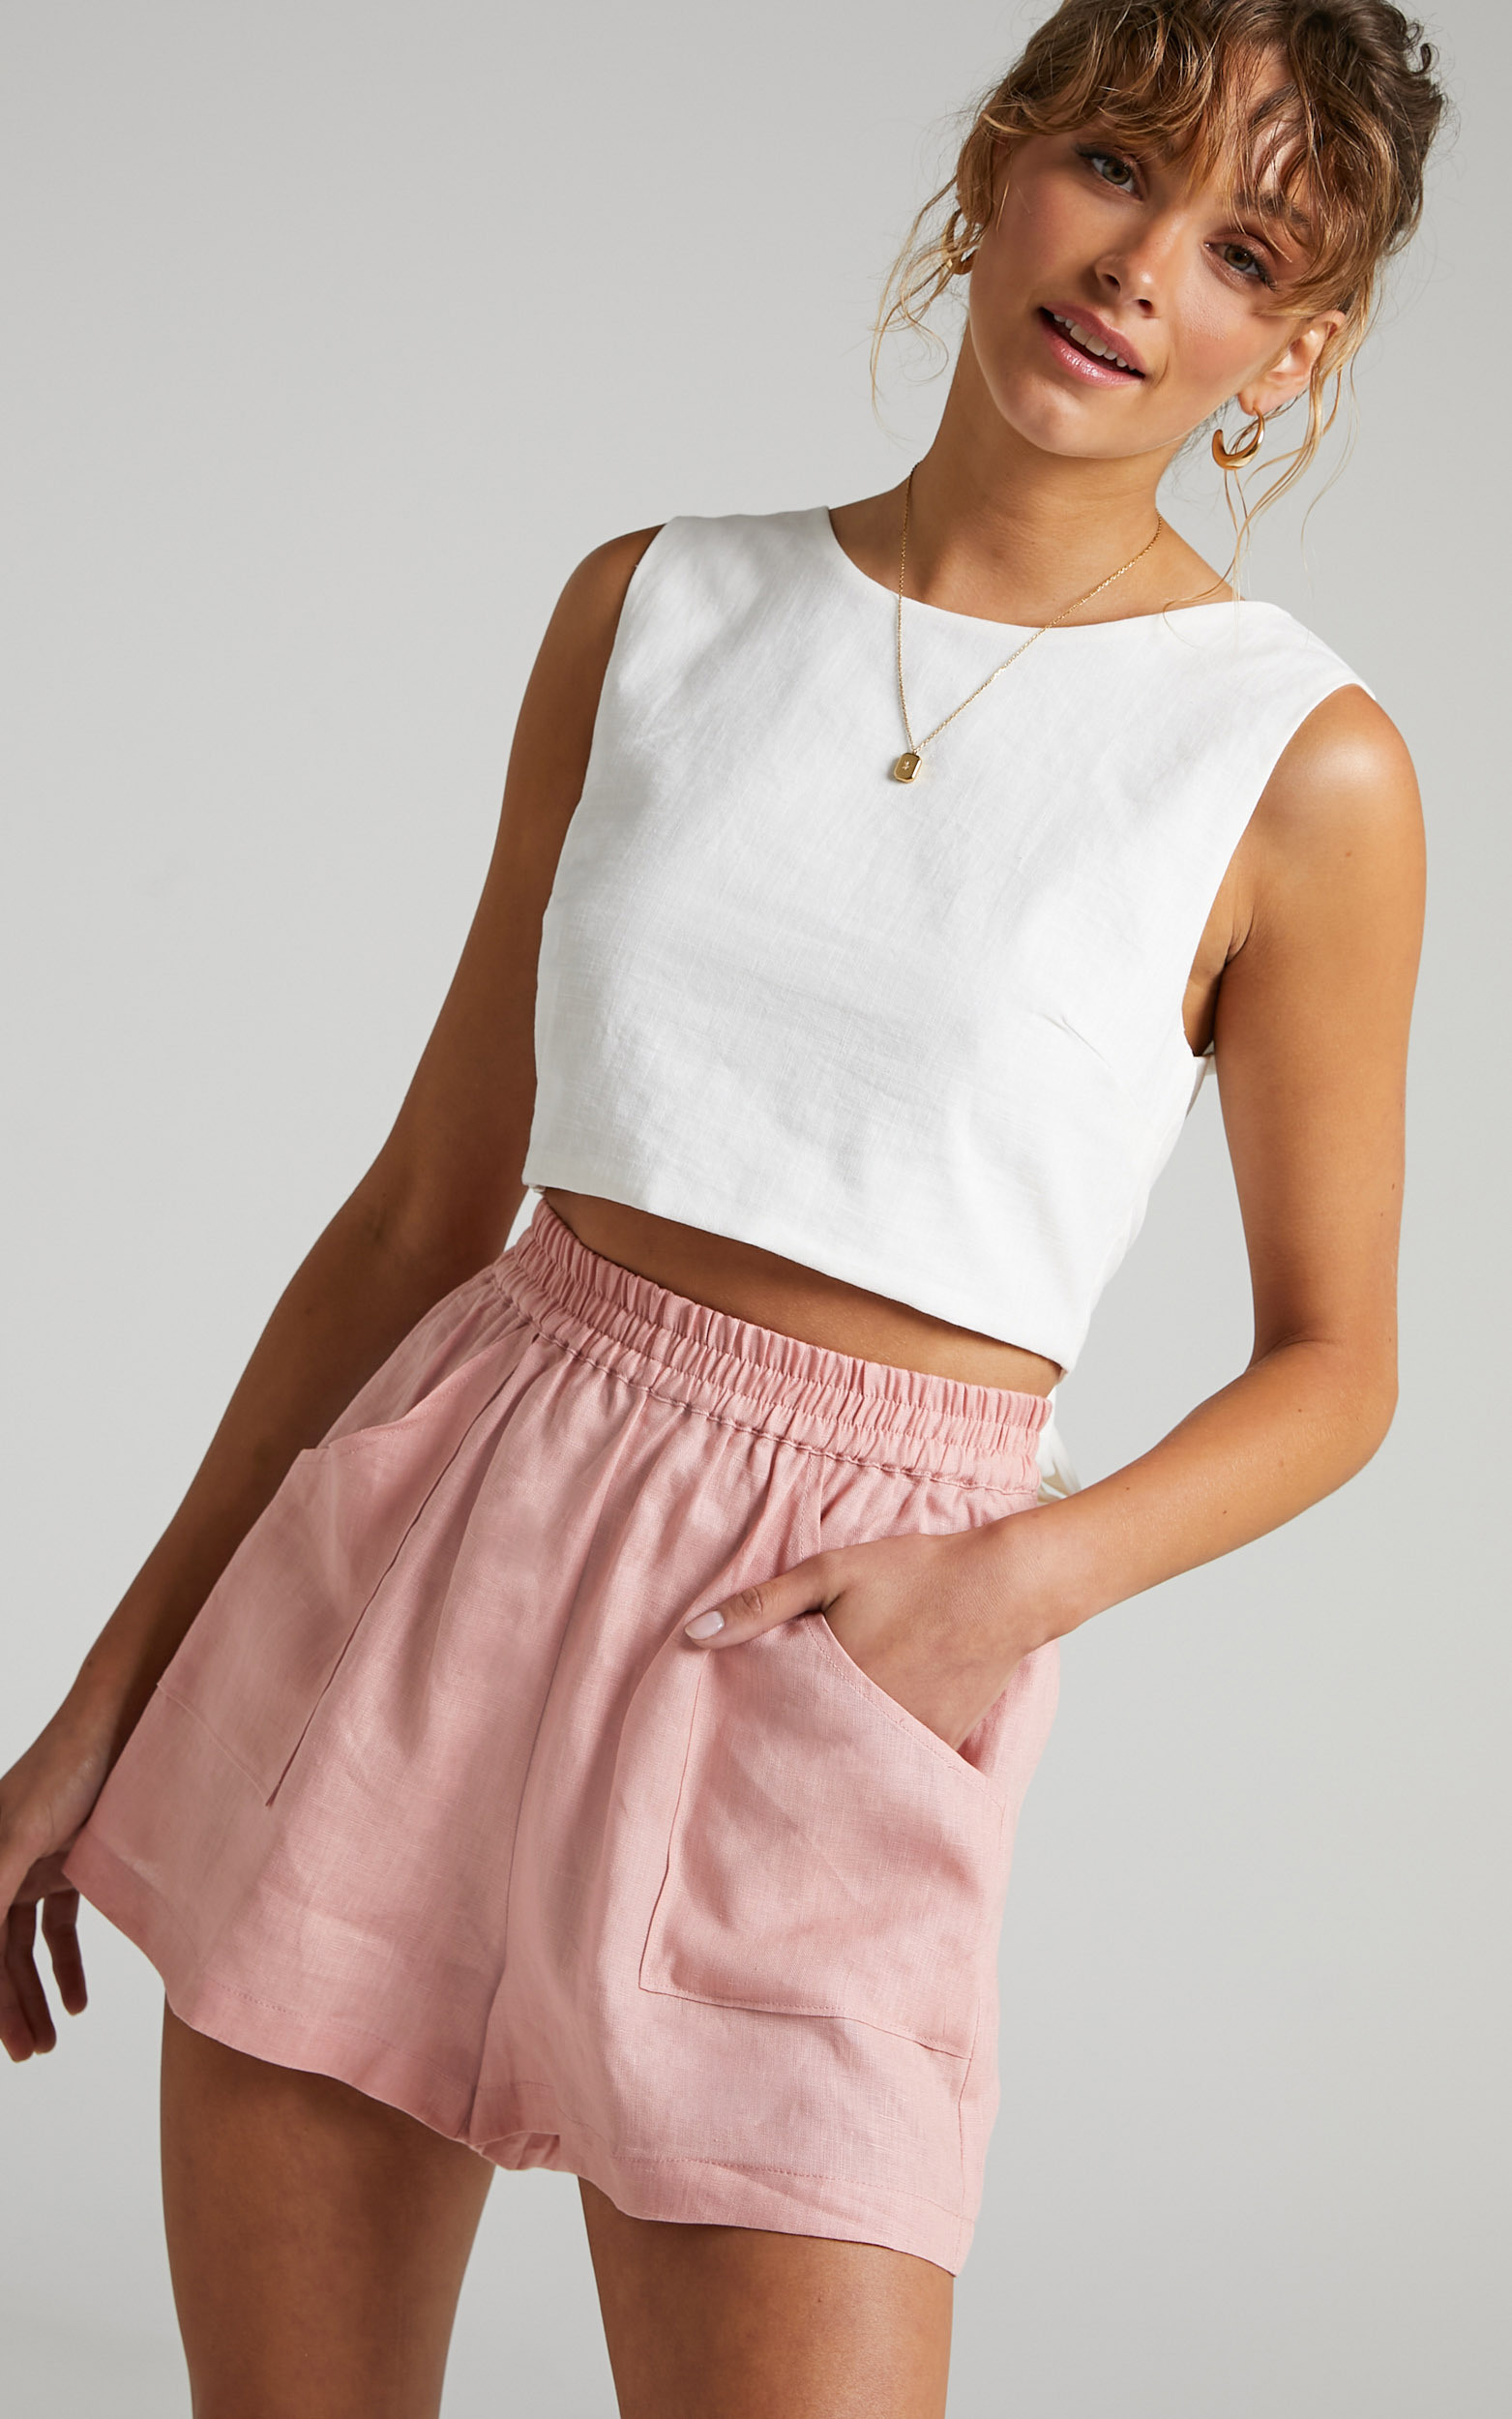 Amalie The Label - Indrissy Linen Elasticated Loose Fit Shorts in Dusty Pink - 06, PNK1, hi-res image number null